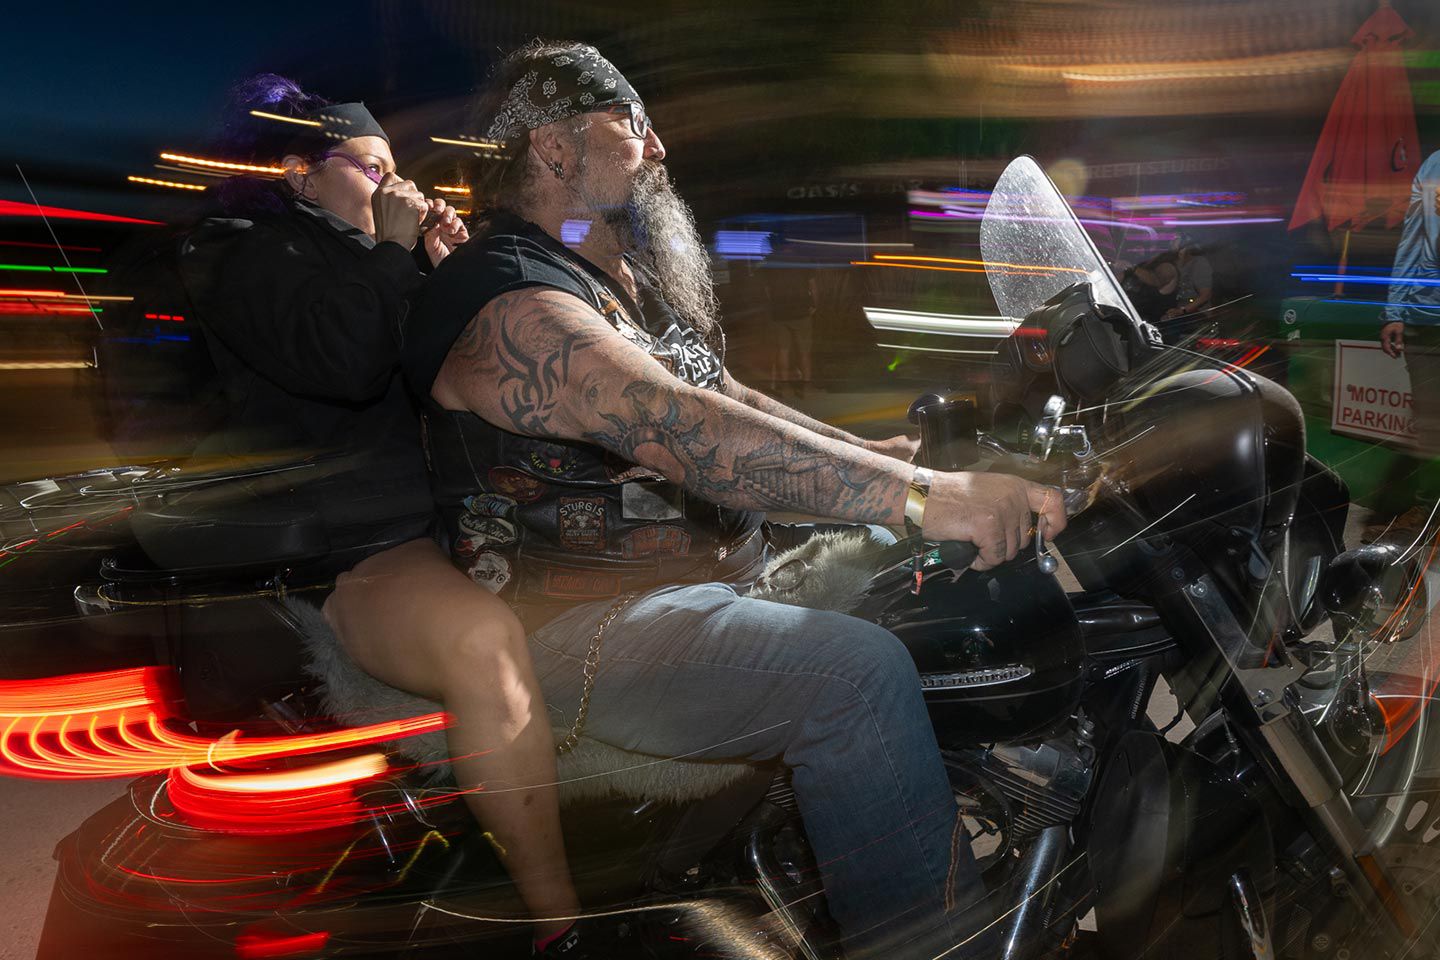 Next stop, night fun. Riding Main Street at dusk during the Sturgis Motorcycle Rally.